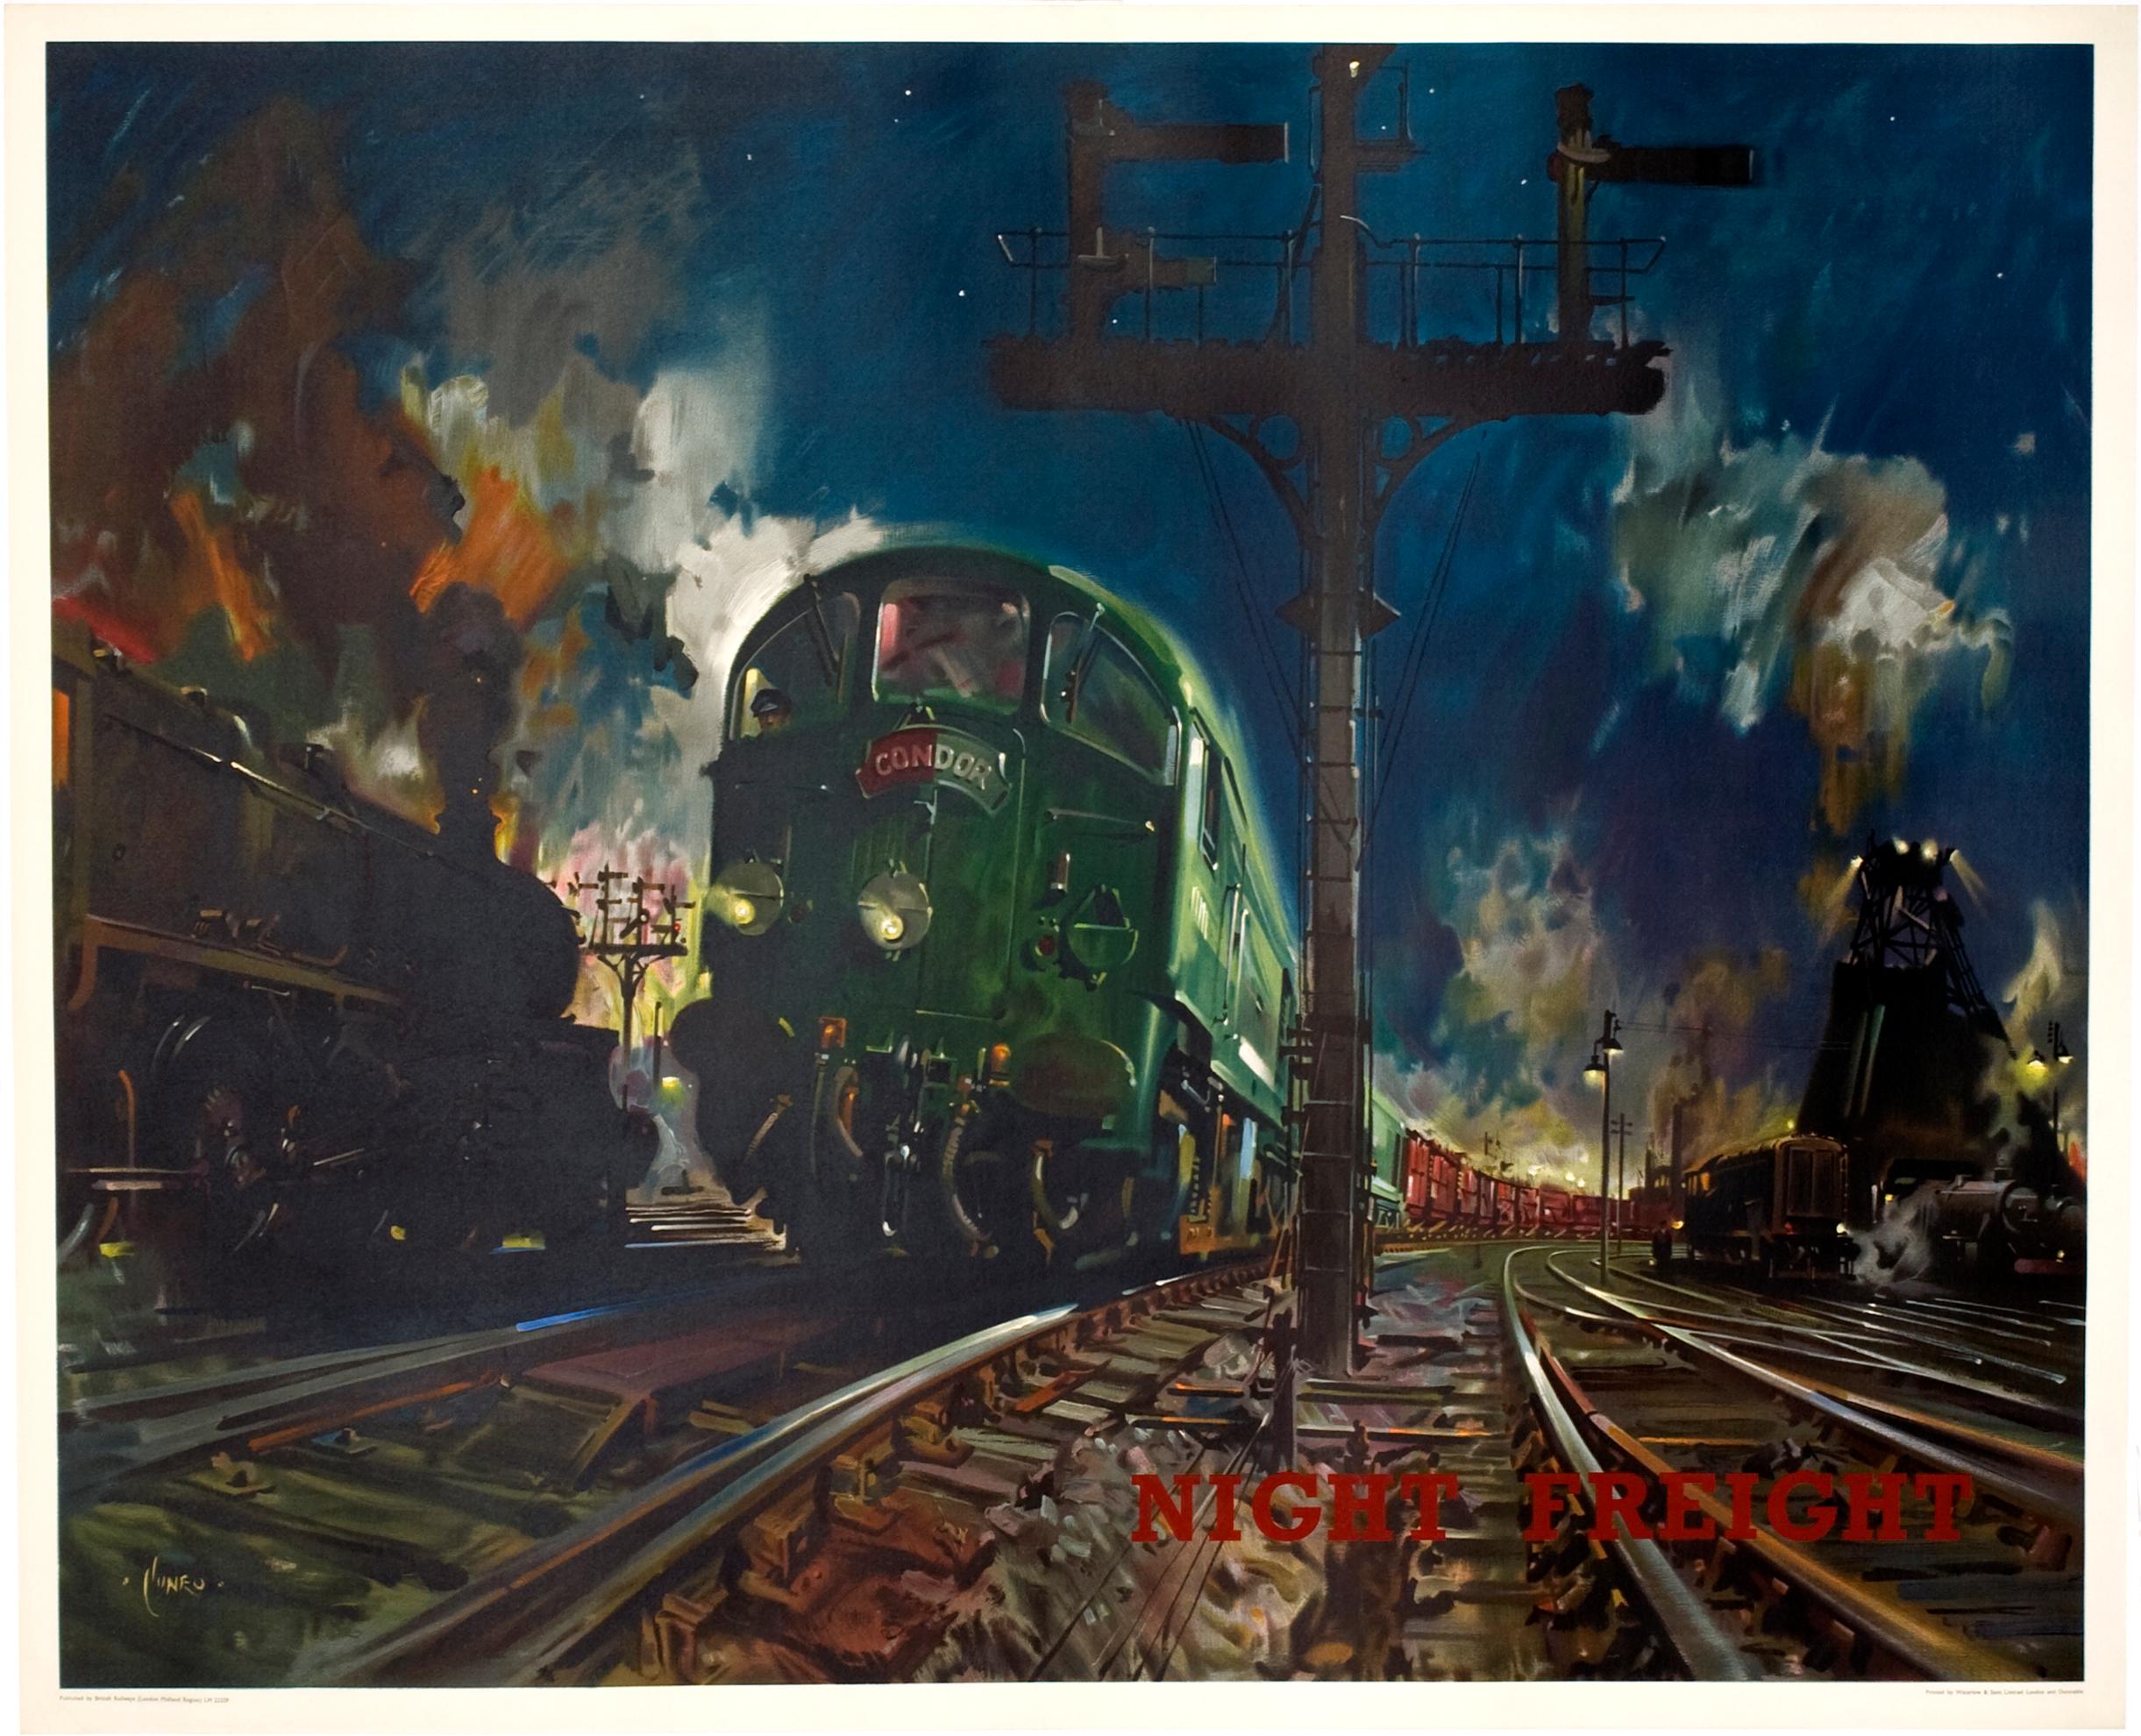 "Night Freight" Original Vintage British Rail poster 1960 - Print by Terence Cuneo